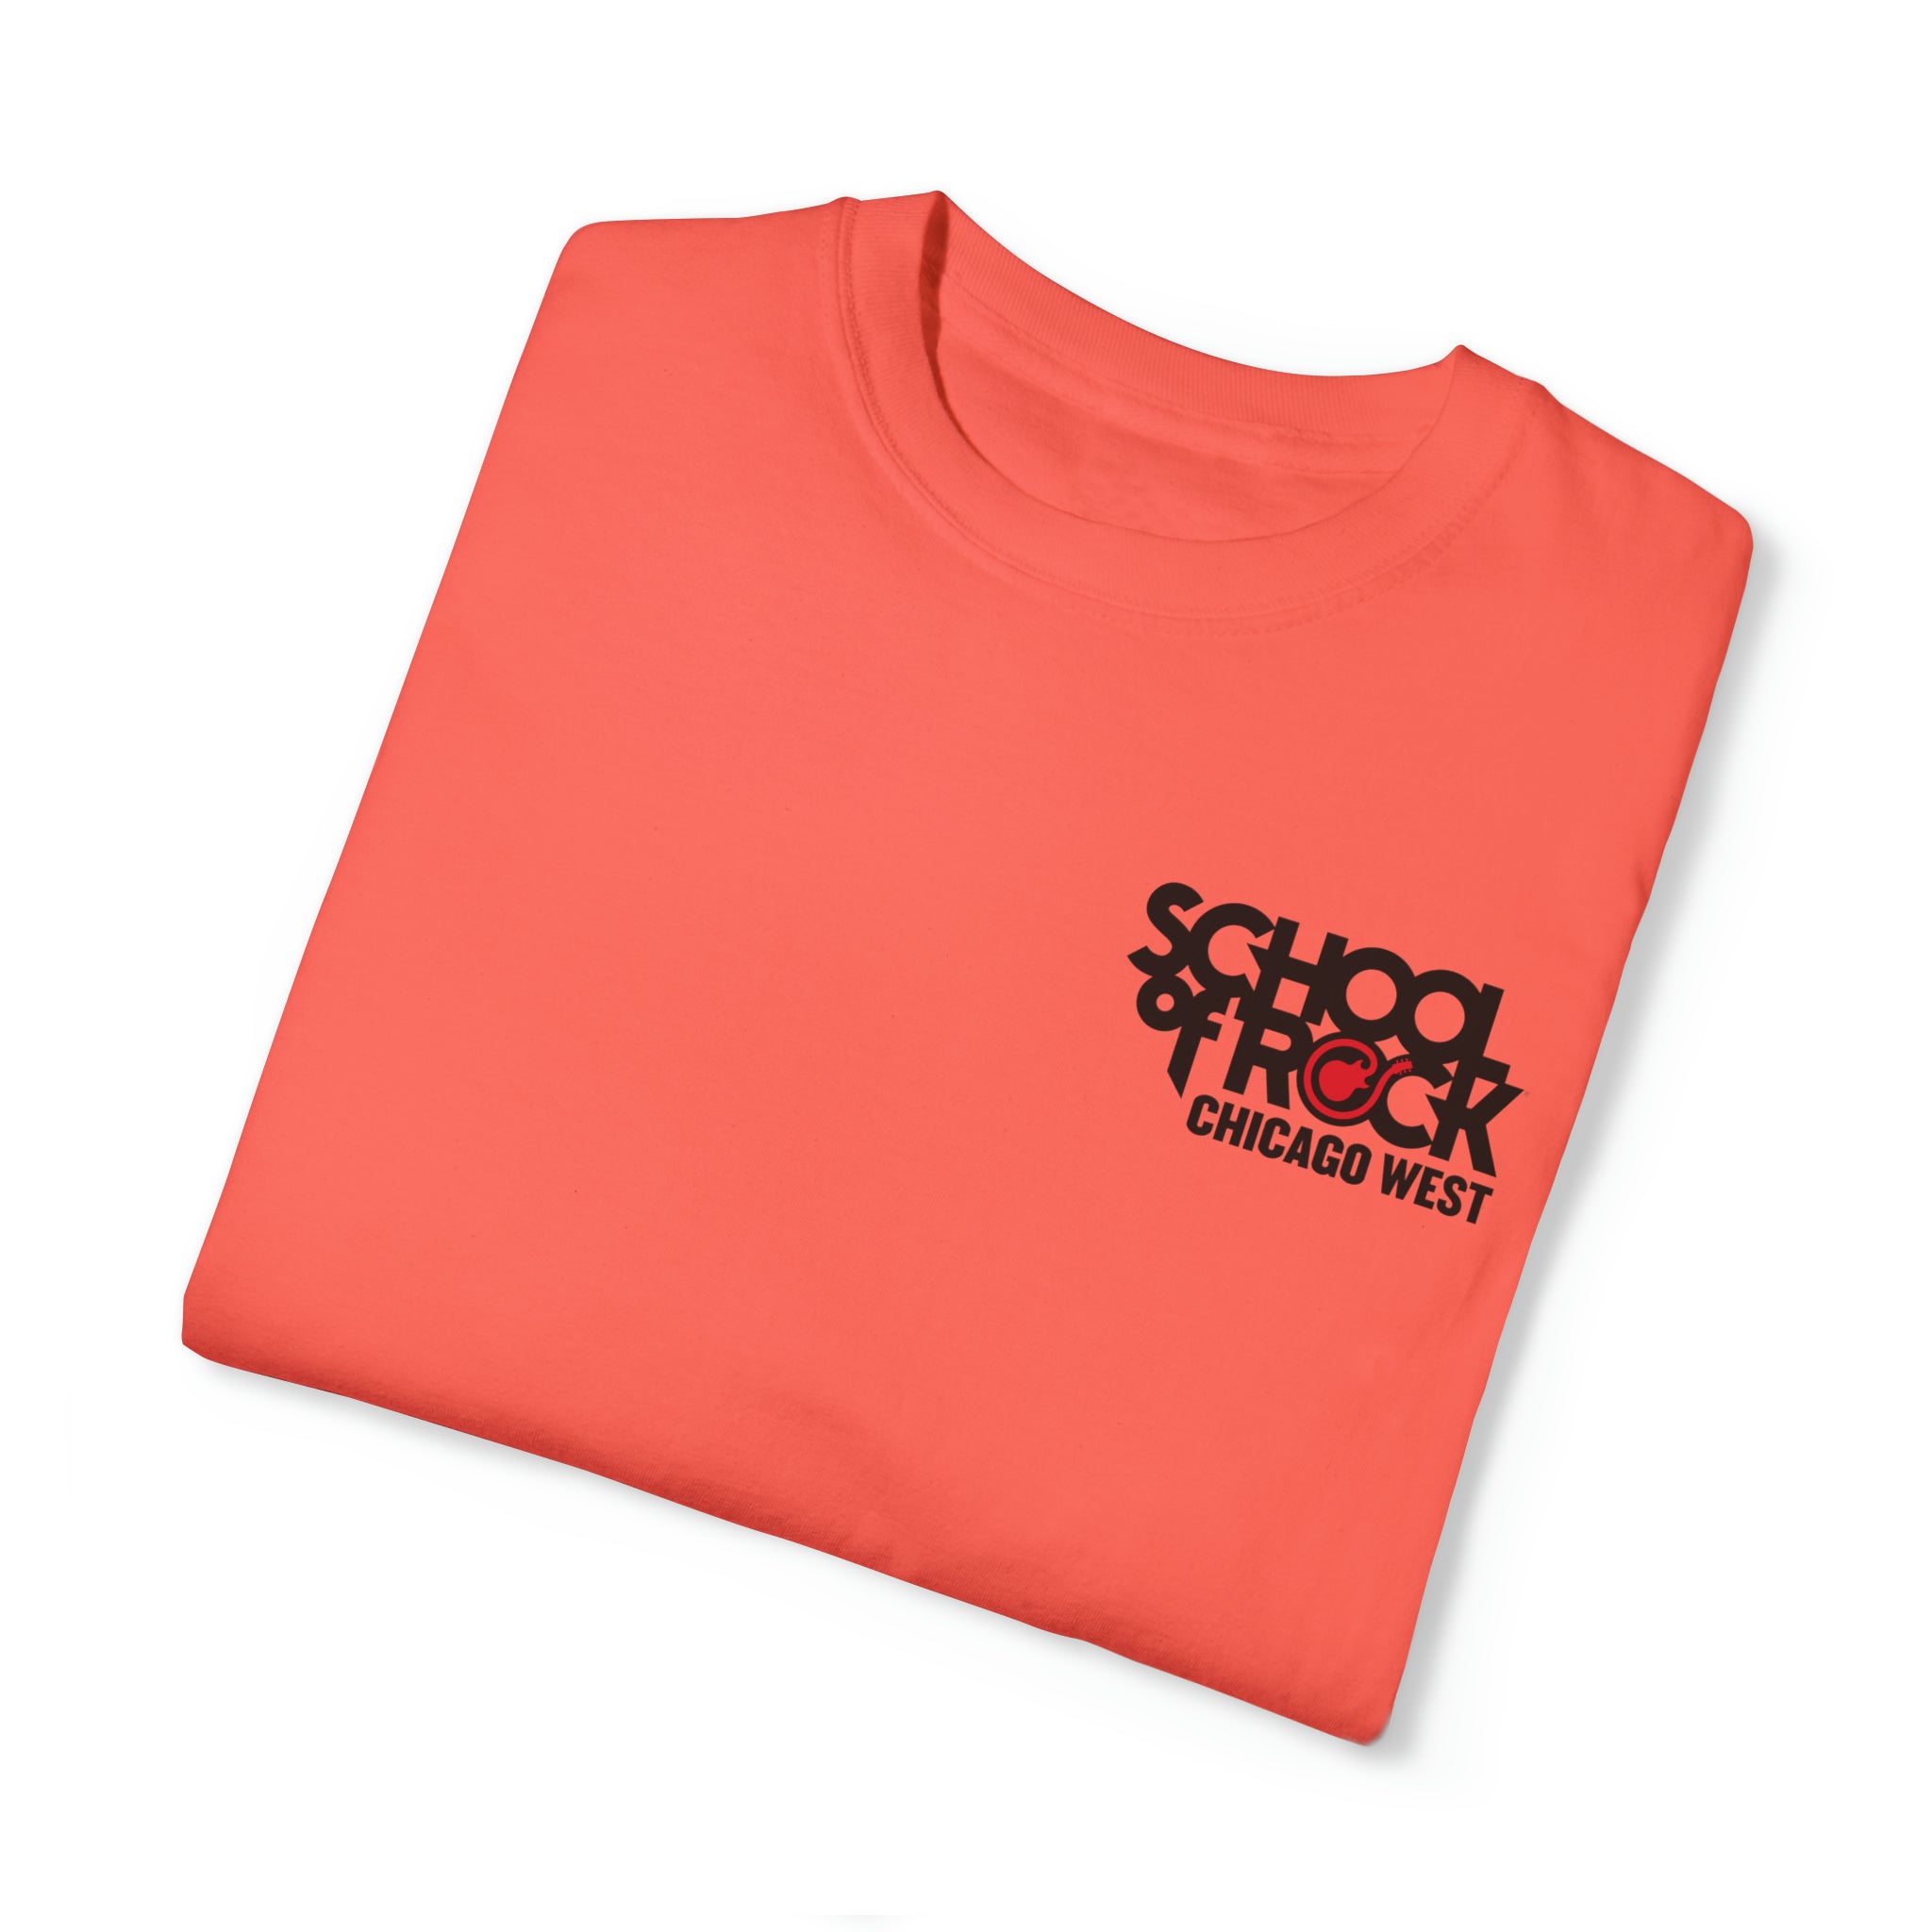 School of Rock Chicago West Comfort Colors Garment Dyed T-shirt